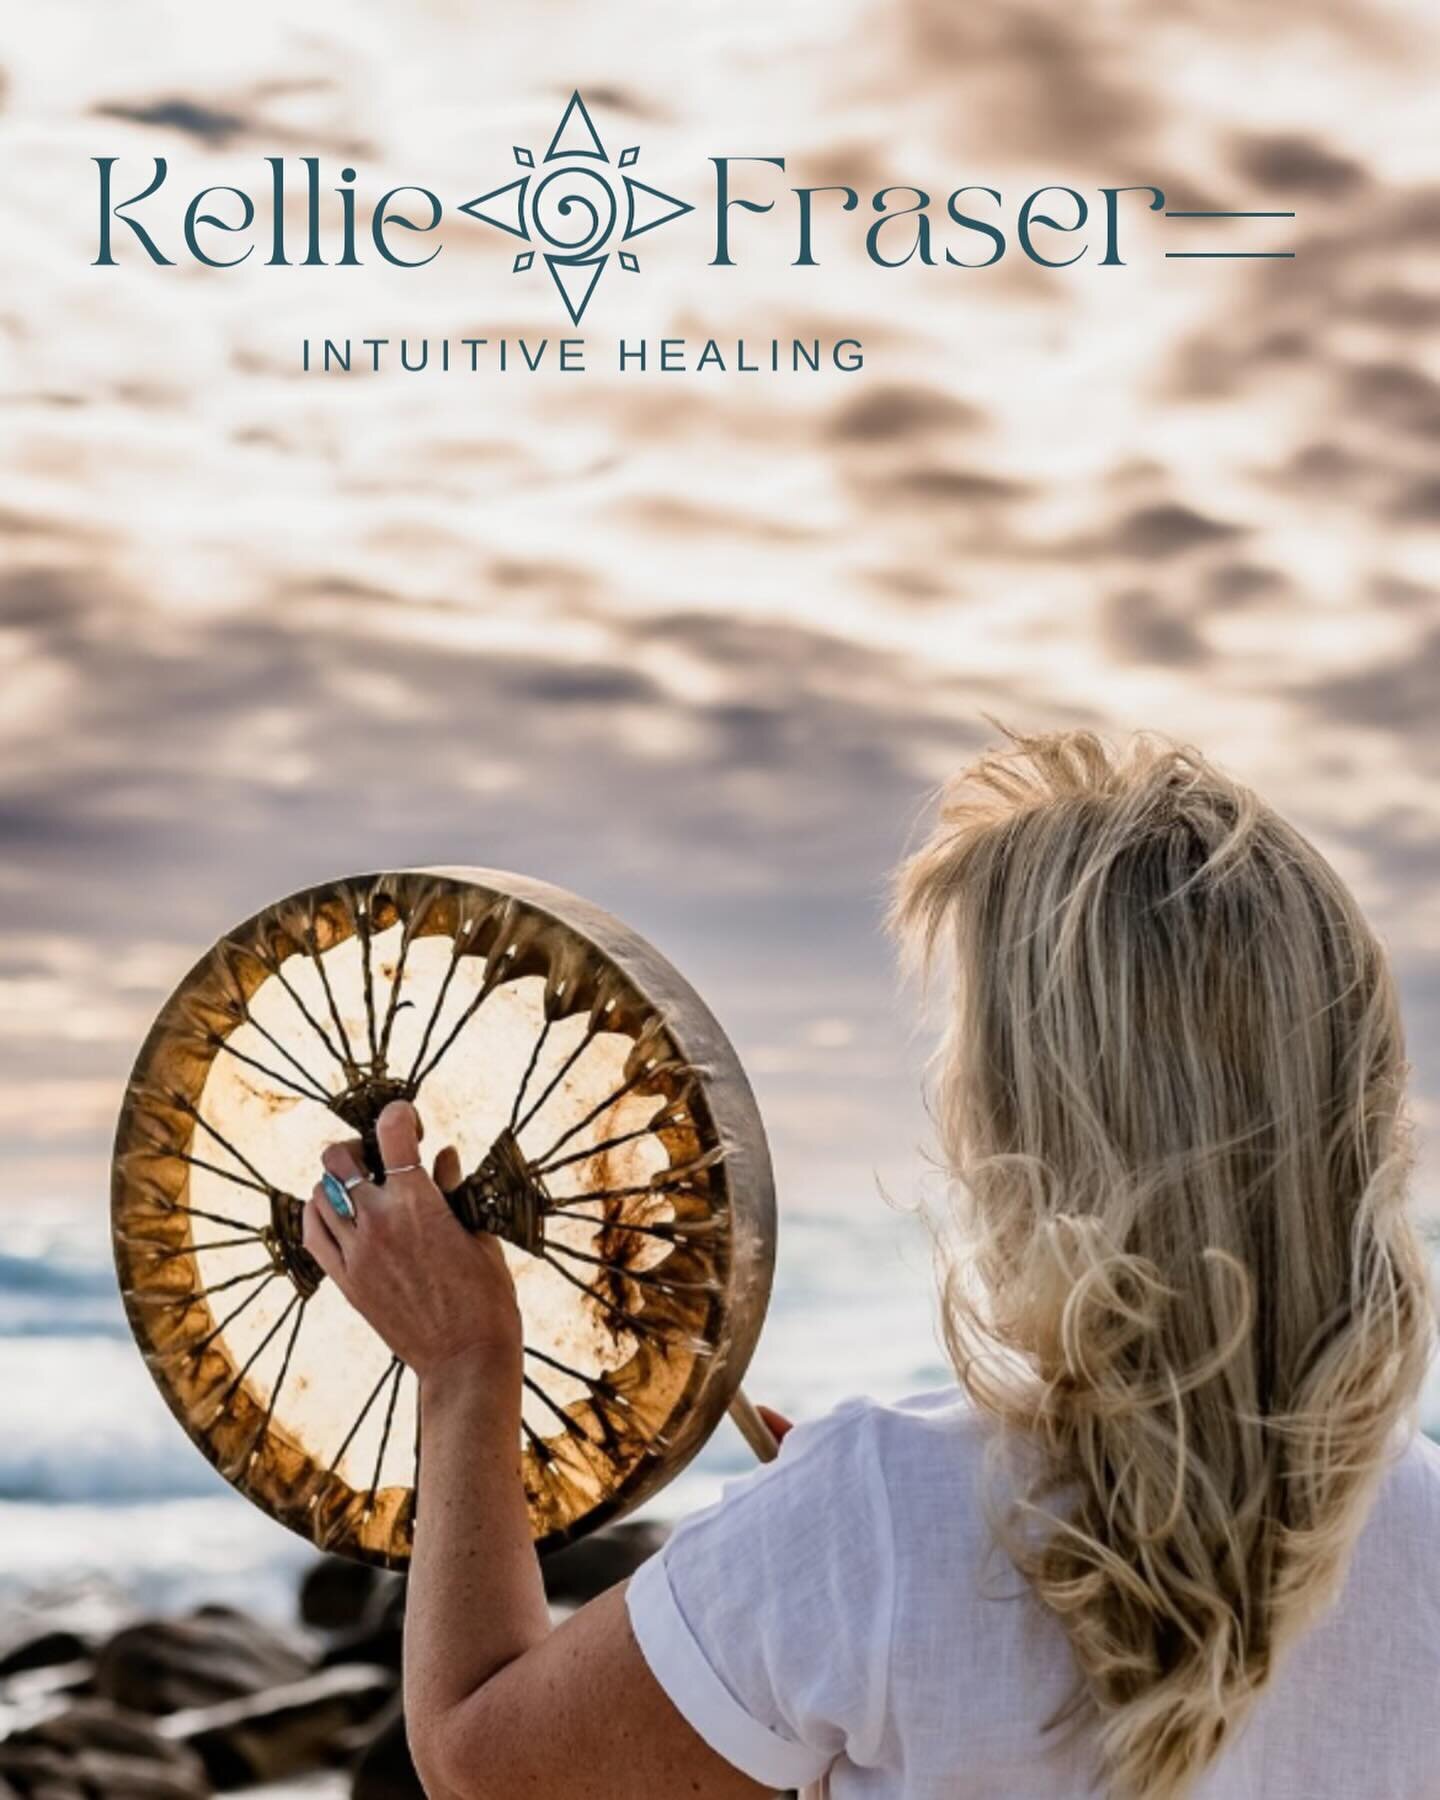 Welcome to Kellie Fraser Intuitive Healing. After a pivot in the way my guides wanted me to work late last year. I received the guidance to relaunch my business, letting go of the old and stepping forward as my authentic self. The underlying purpose 